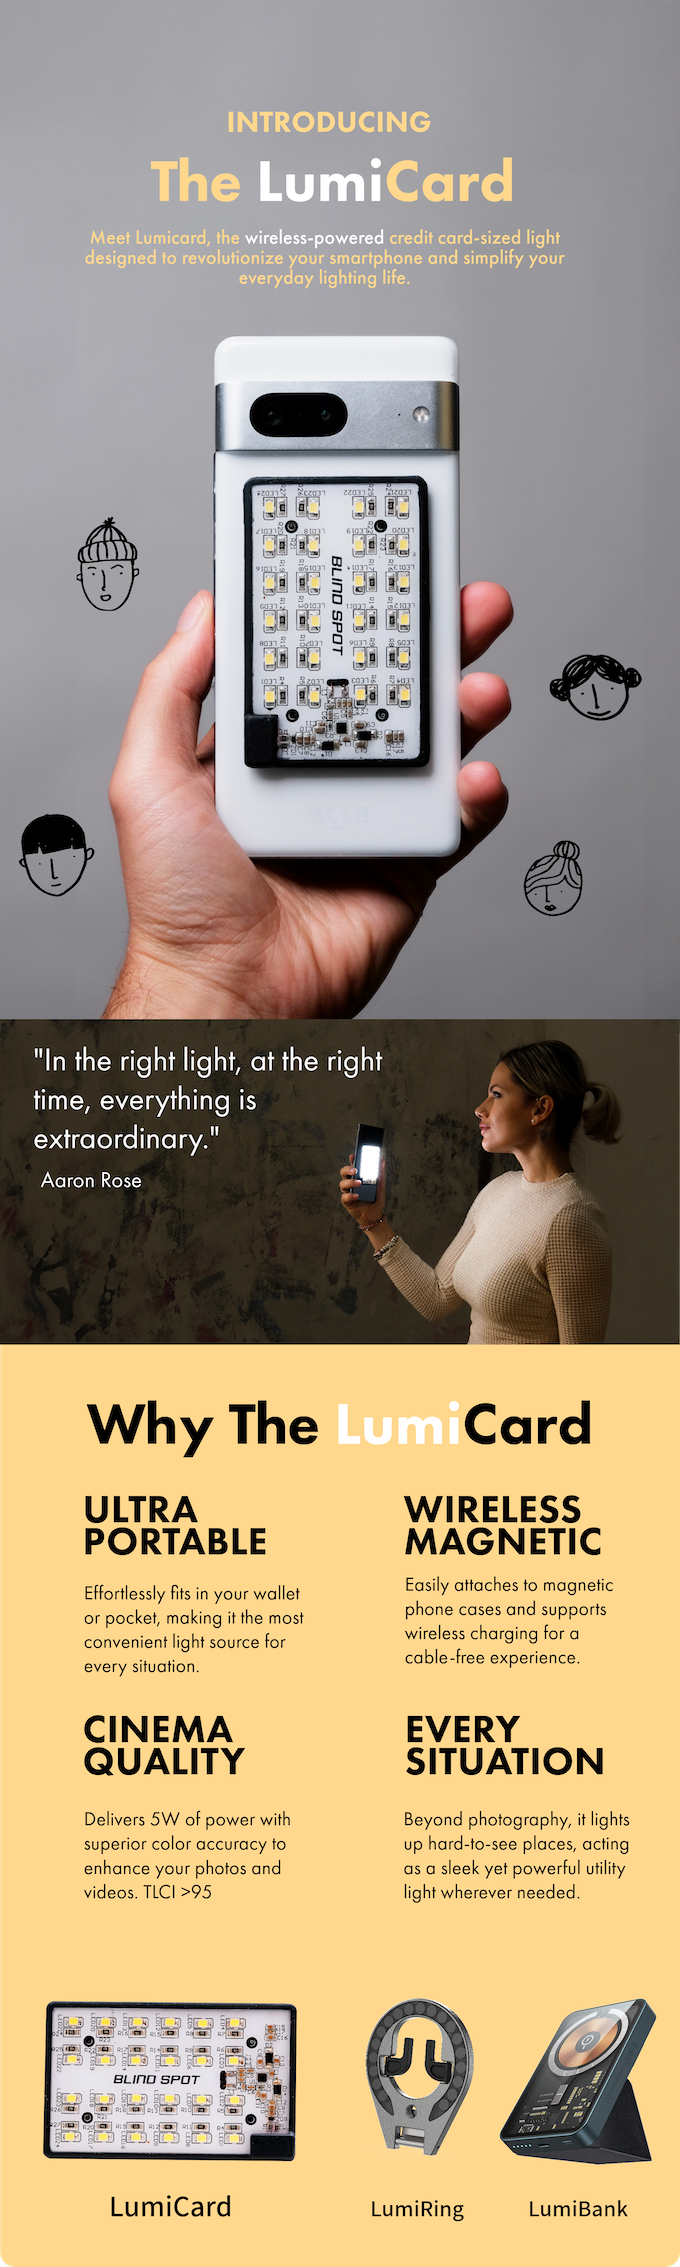 lumicard | lighting revolution from your wallet.,wallet,lightning wallet,minimalist wallet,lightning network,slim wallet,wallet review,bitcoin lightning wallet,how to get a lightning wallet,bitcoin wallet,bitcoin lightning network wallet review,lightning enabled bitcoin wallet,how to use bitcoin lightning network wallet,best bitcoin lightning network wallet in 2023,card wallet,bitcoin hardware wallet,best wallets,wallet unboxing,hardware wallet